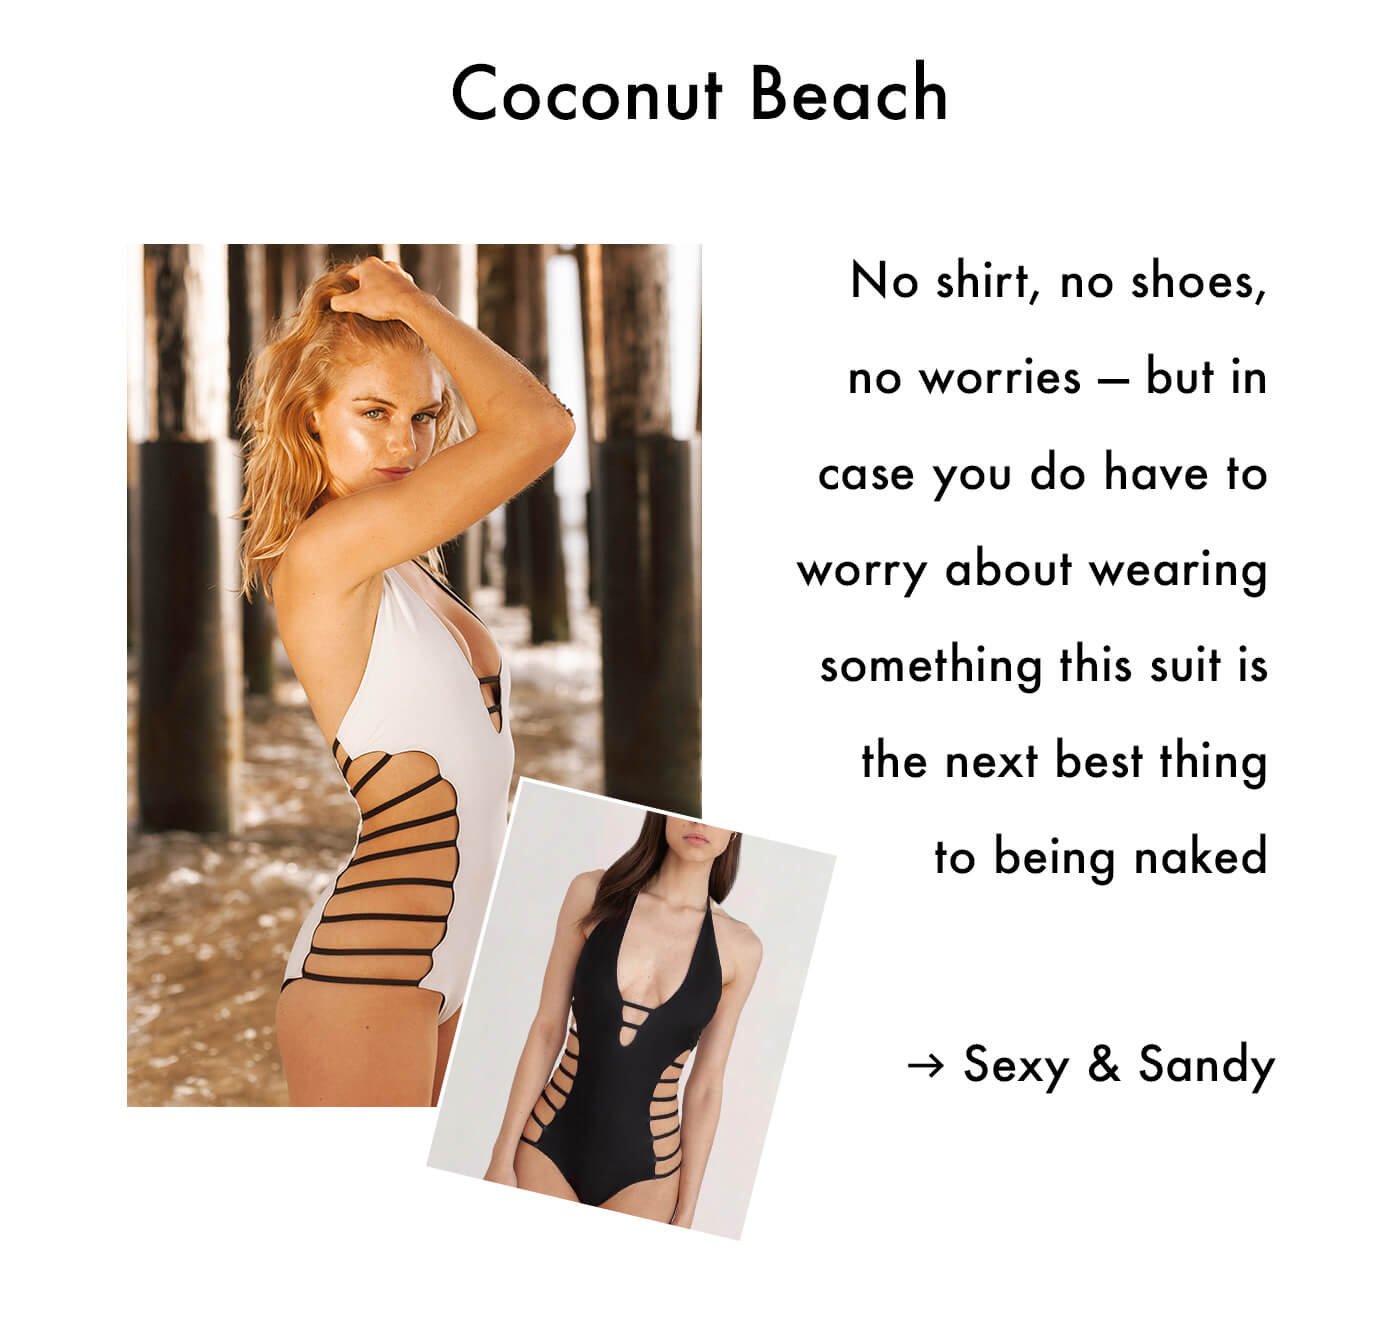 Coconut Beach - No shirt, no shoes, no worries — but in case you do have to worry about wearing something this suit is the next best thing to being naked - Sexy & Sandy